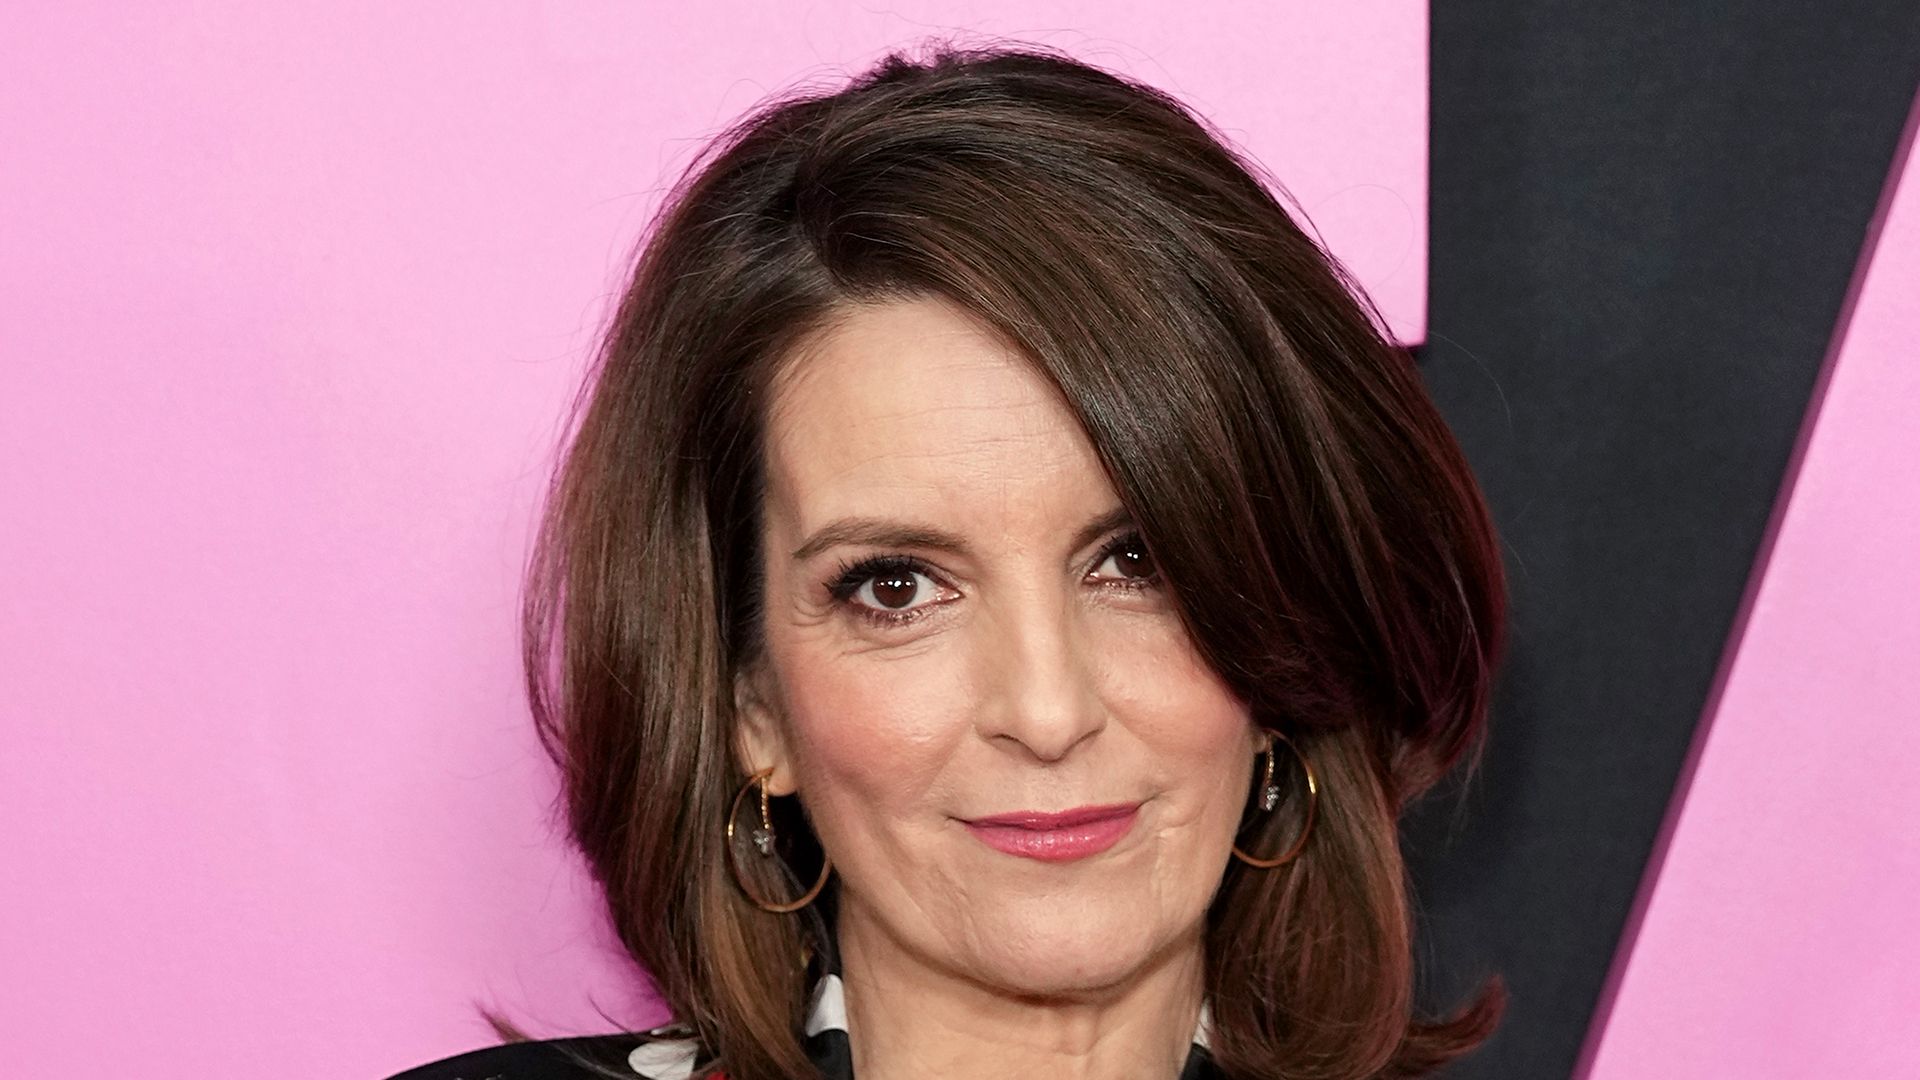 Tina Fey on creating Mean Girls: 'There were real Mean Girls back in my high-school days'